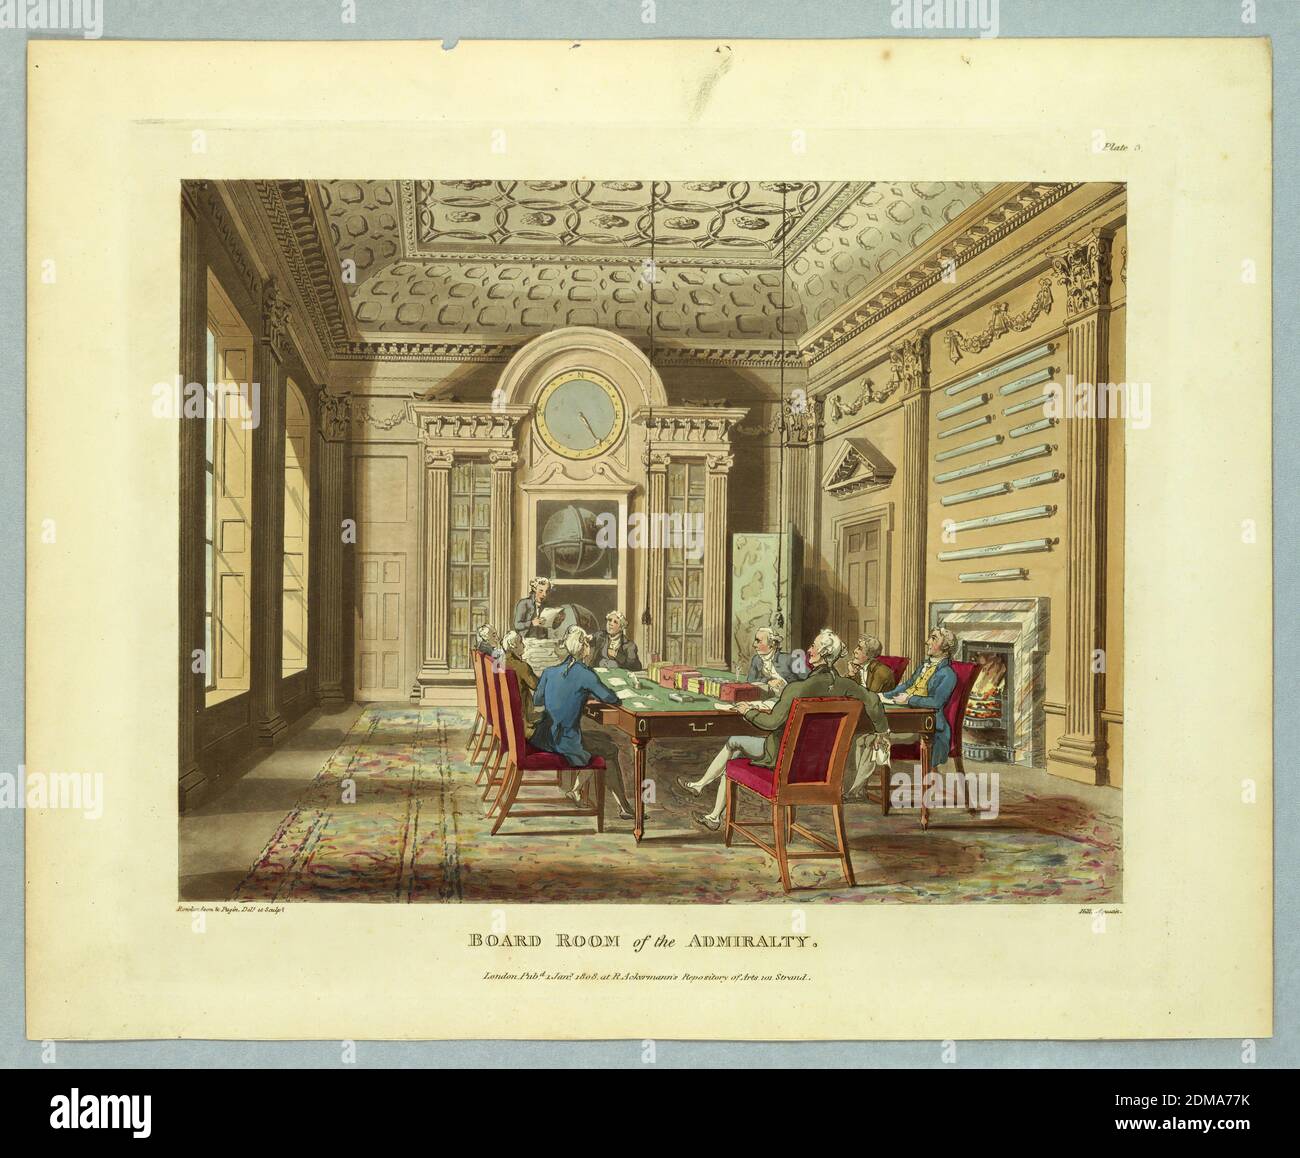 Board Room of the Admiralty, from 'Ackermann's Repository', Thomas Rowlandson, British, 1756–1827, Augustus Charles Pugin, French, active Great Britain, ca. 1762–1832, John Hill, British, active in the United States, 1770 - 1850, Aquatint, brush and watercolors on paper, Nine men about a cloth covered table, center, in a large room. Books, maps above the fireplace, right. Title, artists', and publisher's names below., Europe, London, England, 1808, Print Stock Photo